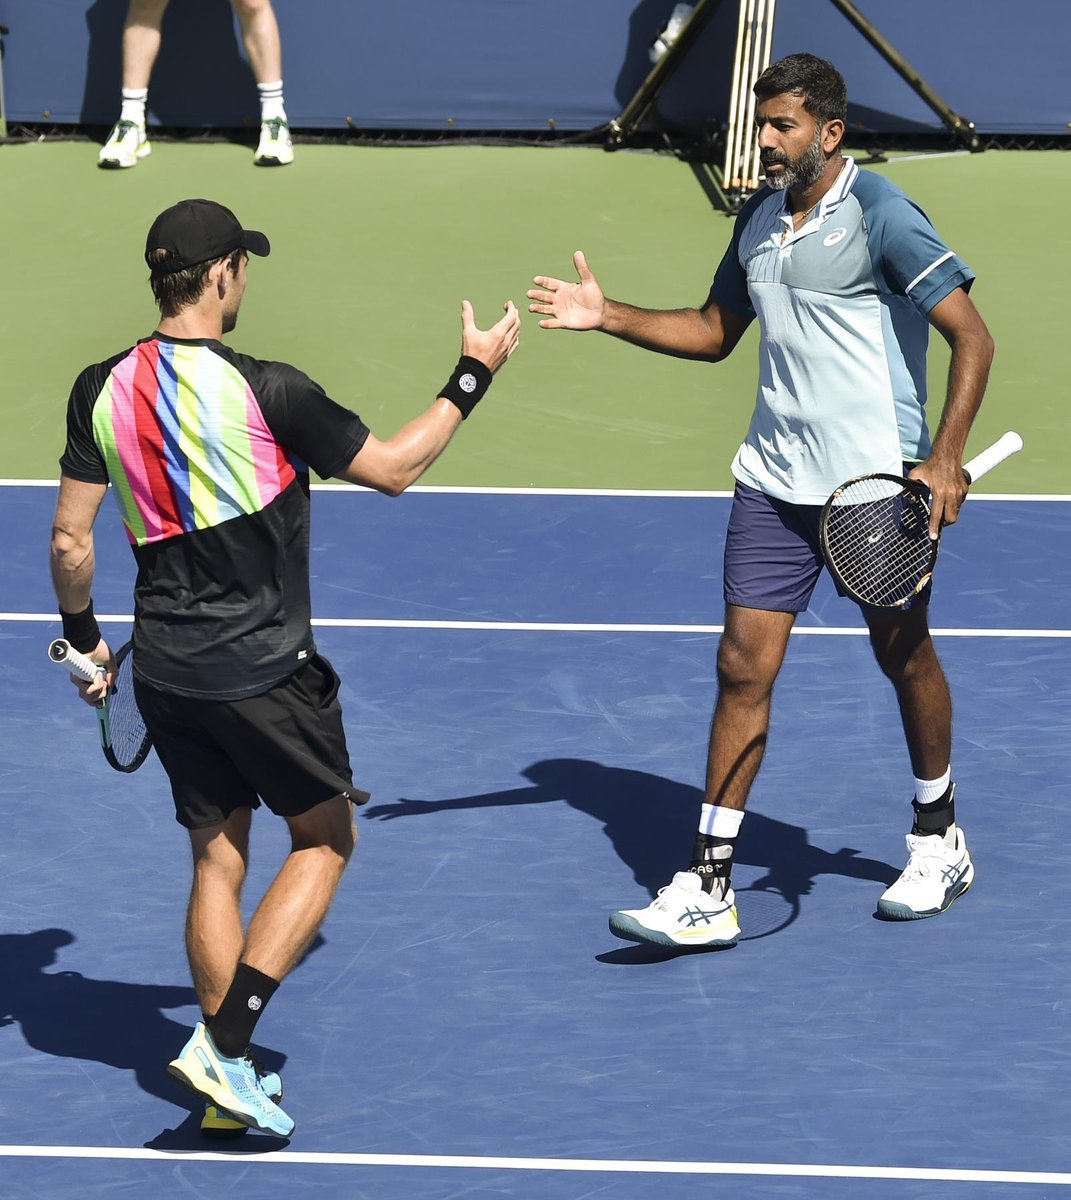 India's Rohan Bopanna and his Australian partner Matthew Ebden crashed out of the prestigious #ItalianOpen Tennis in Rome. The second-seeded Indian- Australian duo faced a defeat against the unseeded pair of Simone Bolelli and Andrea Vavassori of the host country, 2-6, 4-6, in…